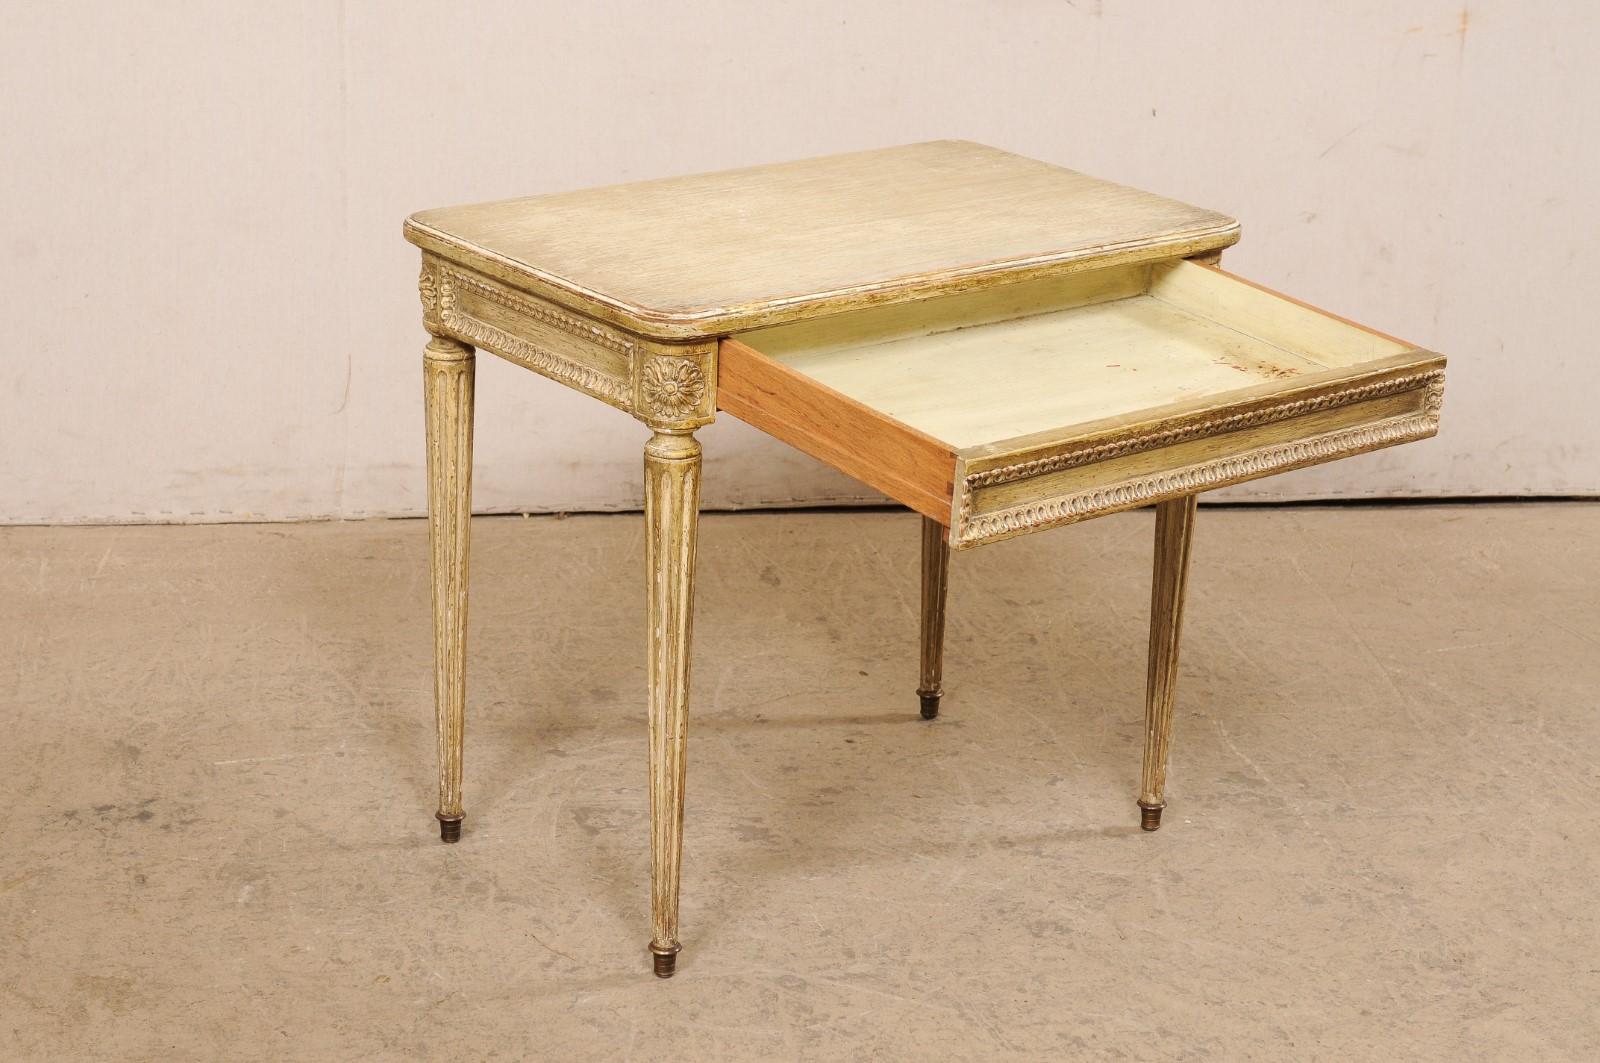 20th Century Louis XVI Style French Side Table with its Original Painted Finish Early 20th C. For Sale